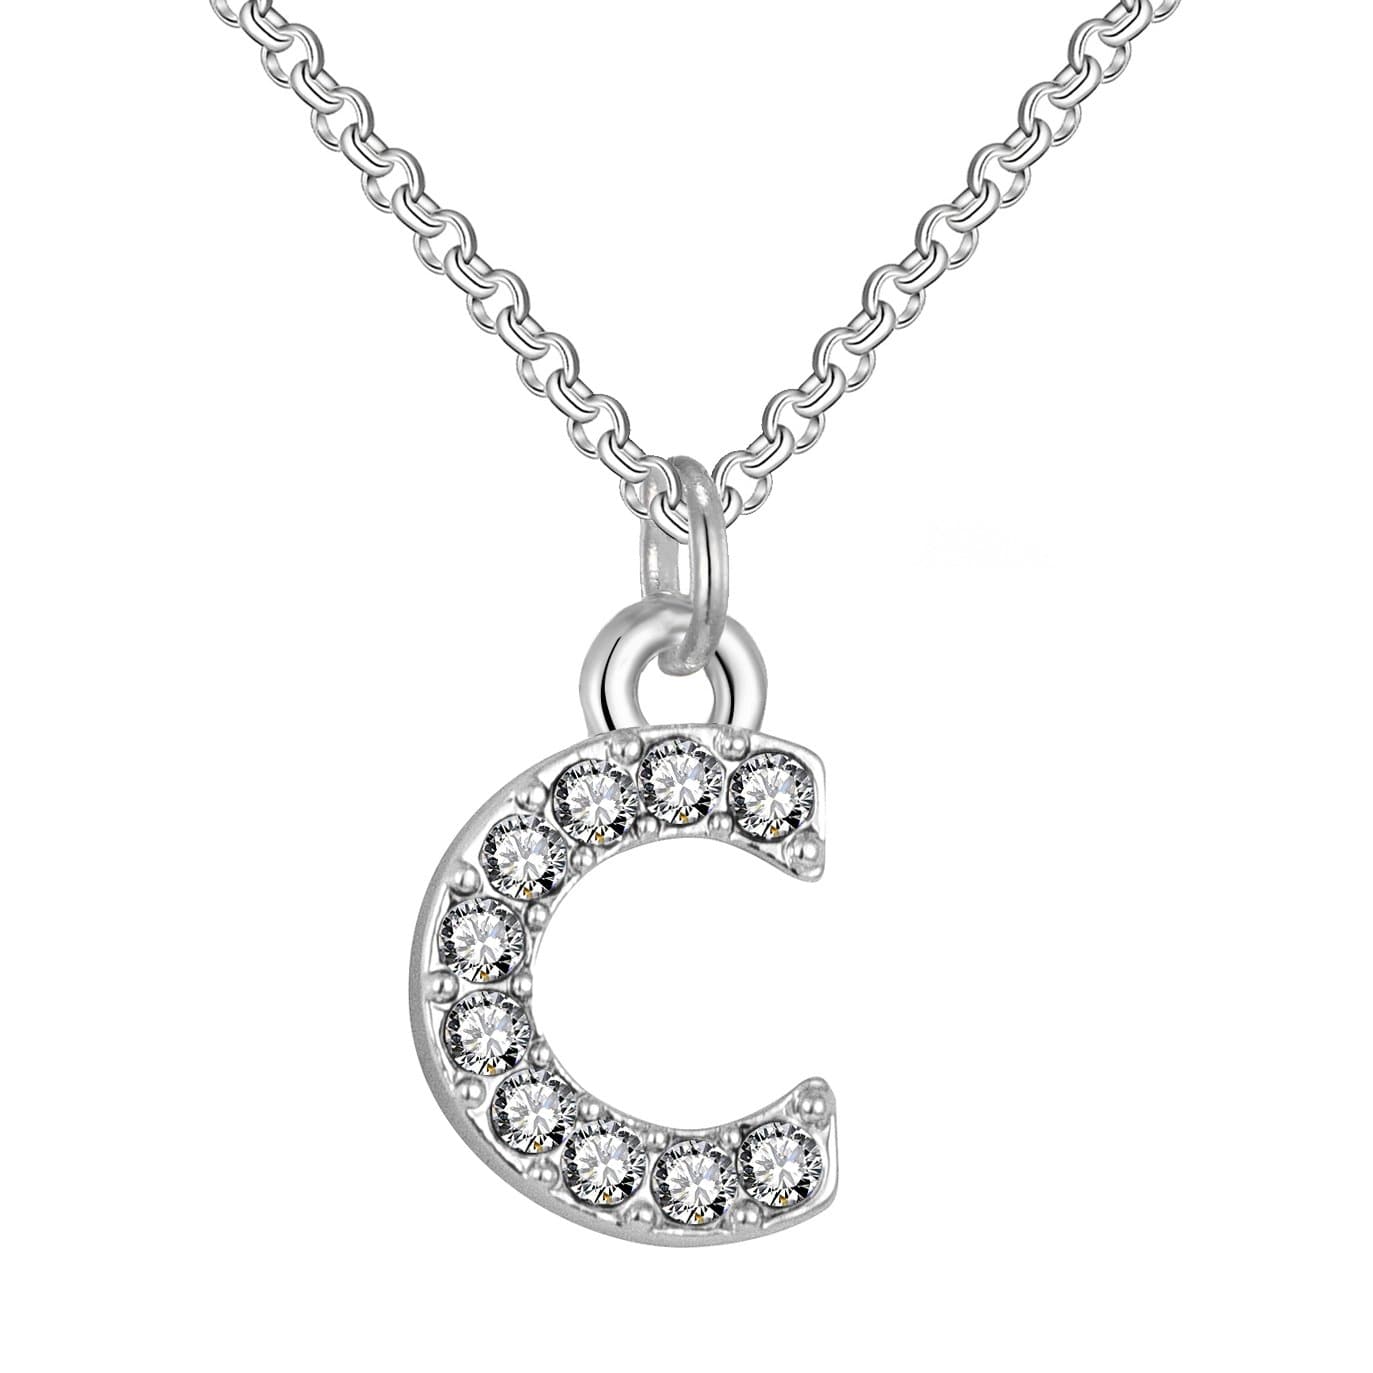 Pave Initial Necklace Letter C Created with Zircondia® Crystals by Philip Jones Jewellery